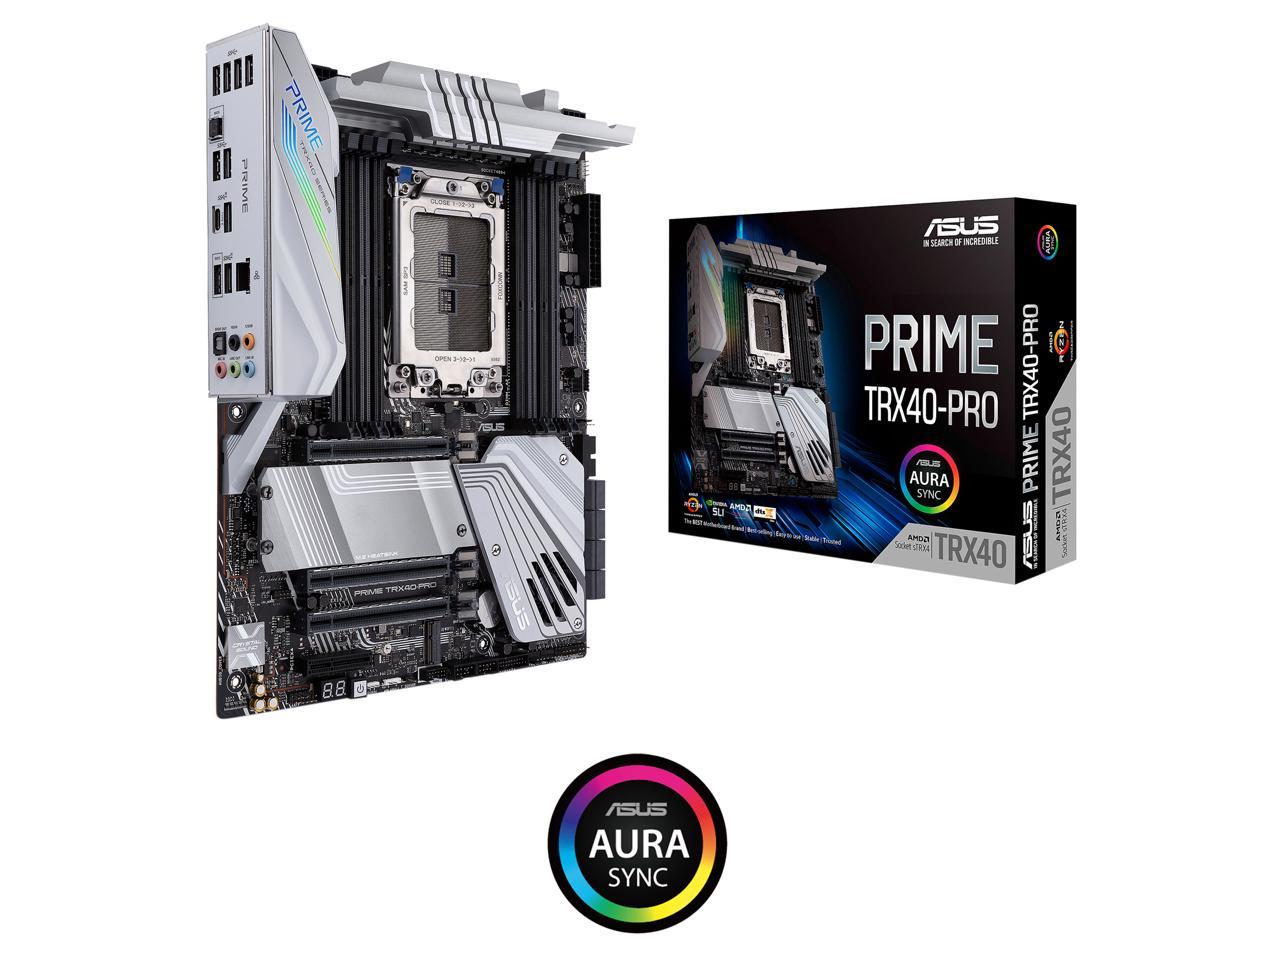 Media asset in full size related to 3dfxzone.it news item entitled as follows: AMD commercializzata la CPU monster a 64 core Ryzen Threadripper 3990X | Image Name: news30441_AMD-Ryzen-Threadripper-3990X_4.jpg